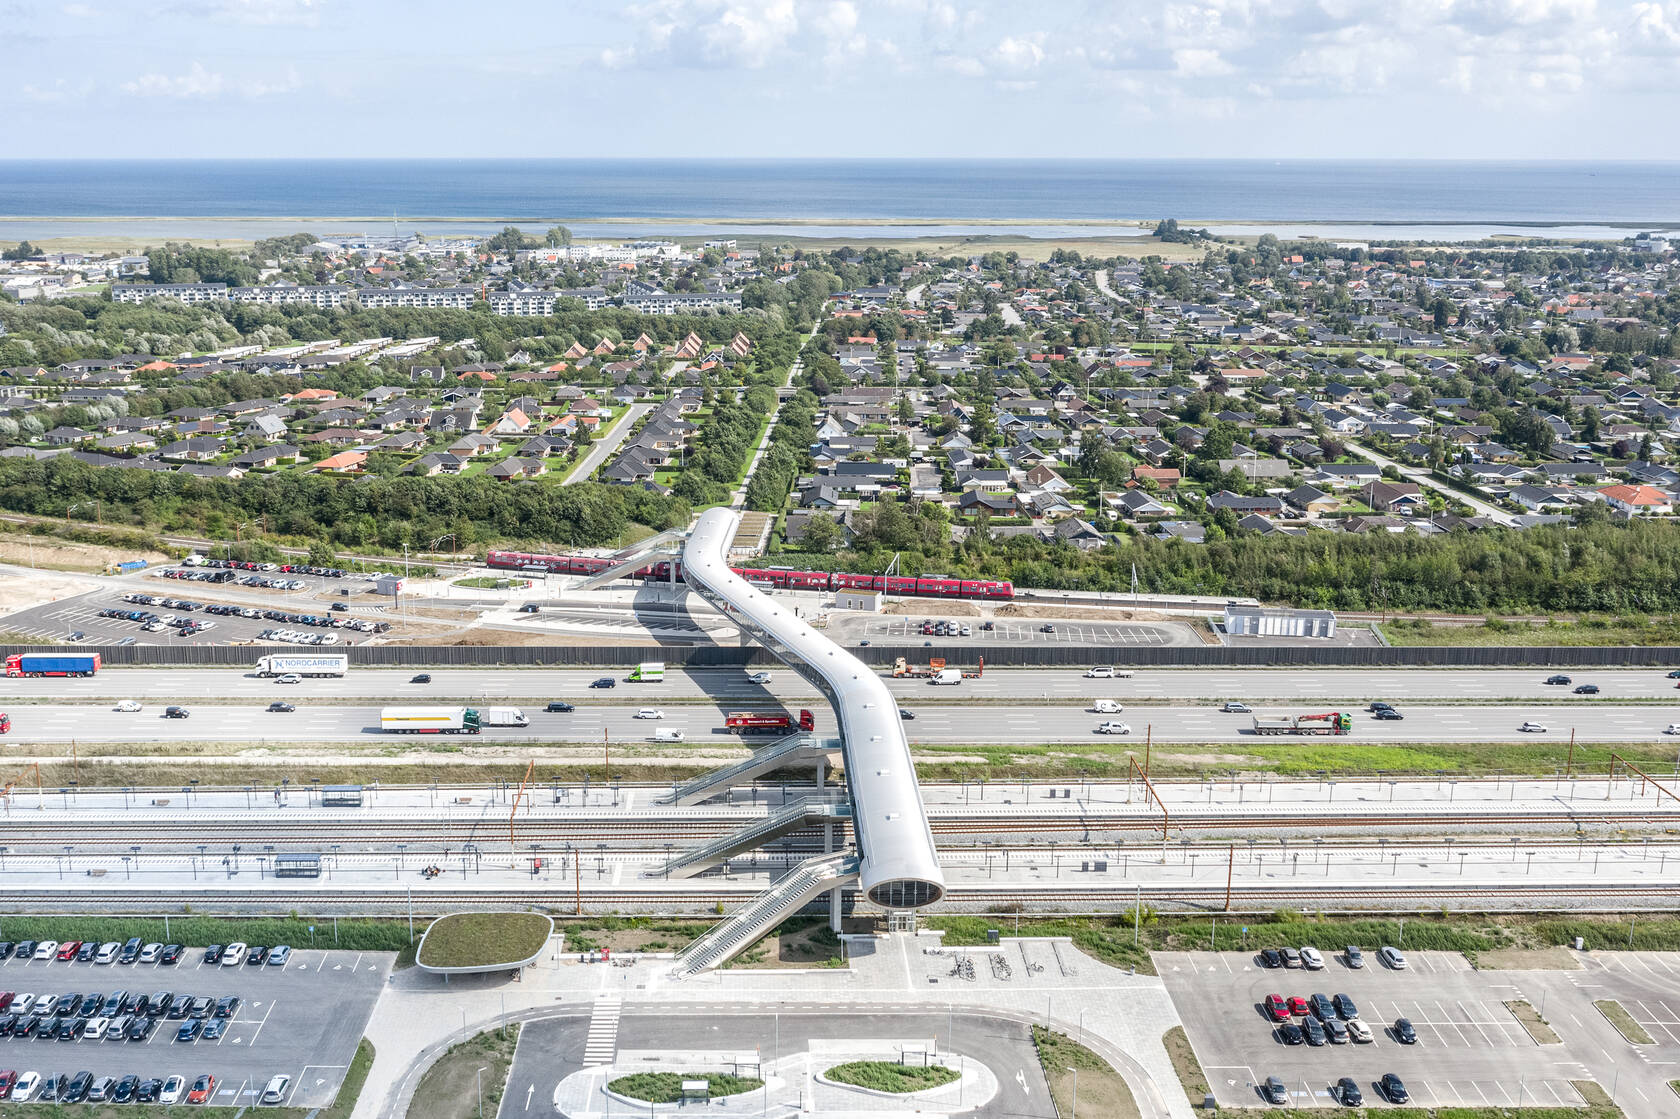 cobe koge nord station aerial view